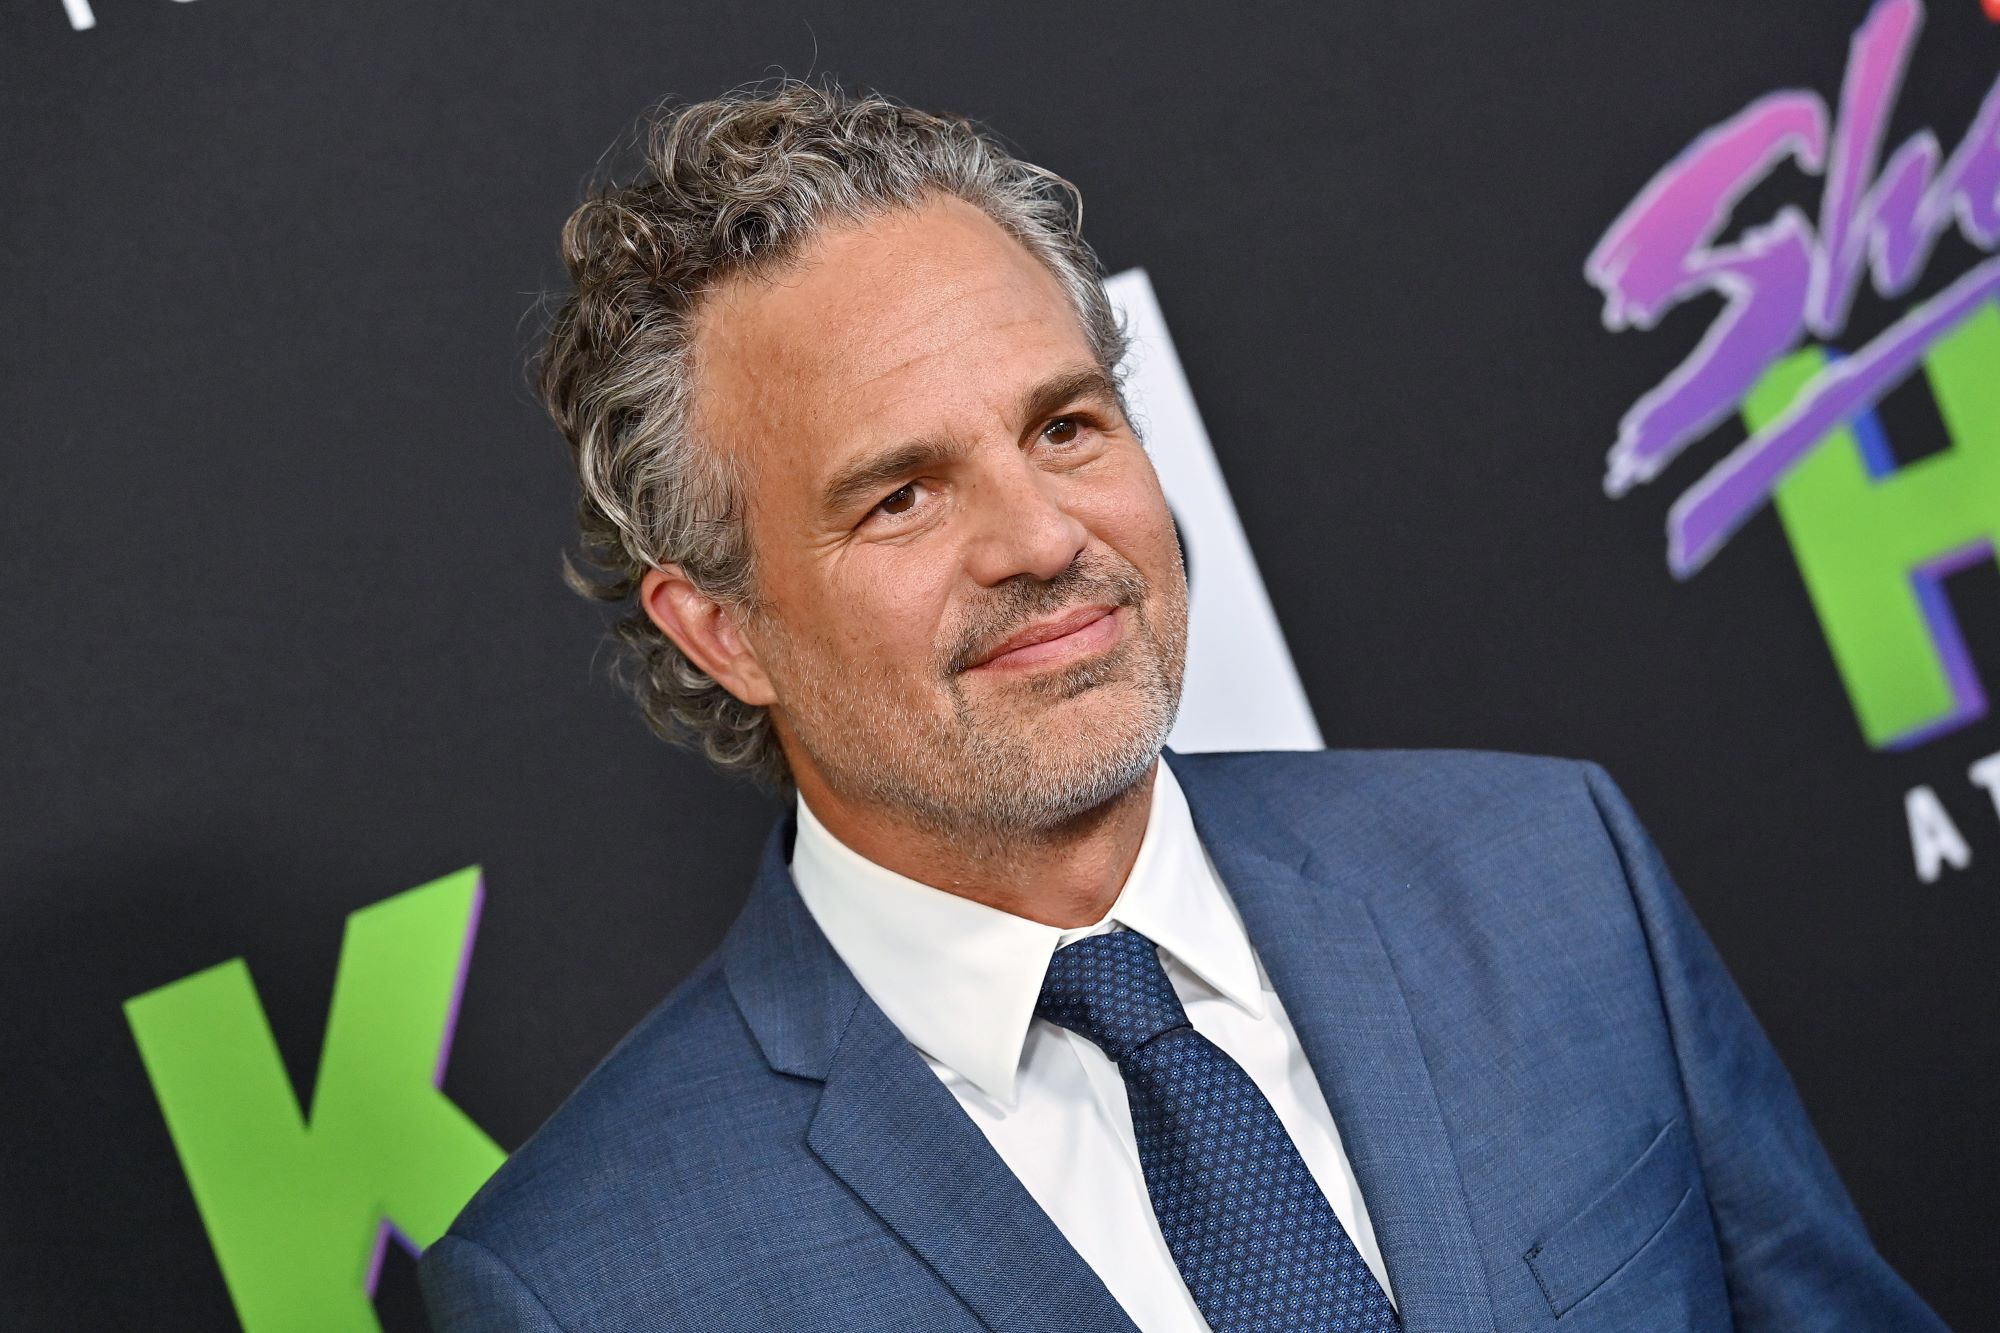 Mark Ruffalo, who stars as Bruce Banner/Hulk in the 'Avengers' movies, wears a blue suit over a white button-up shirt and blue tie.